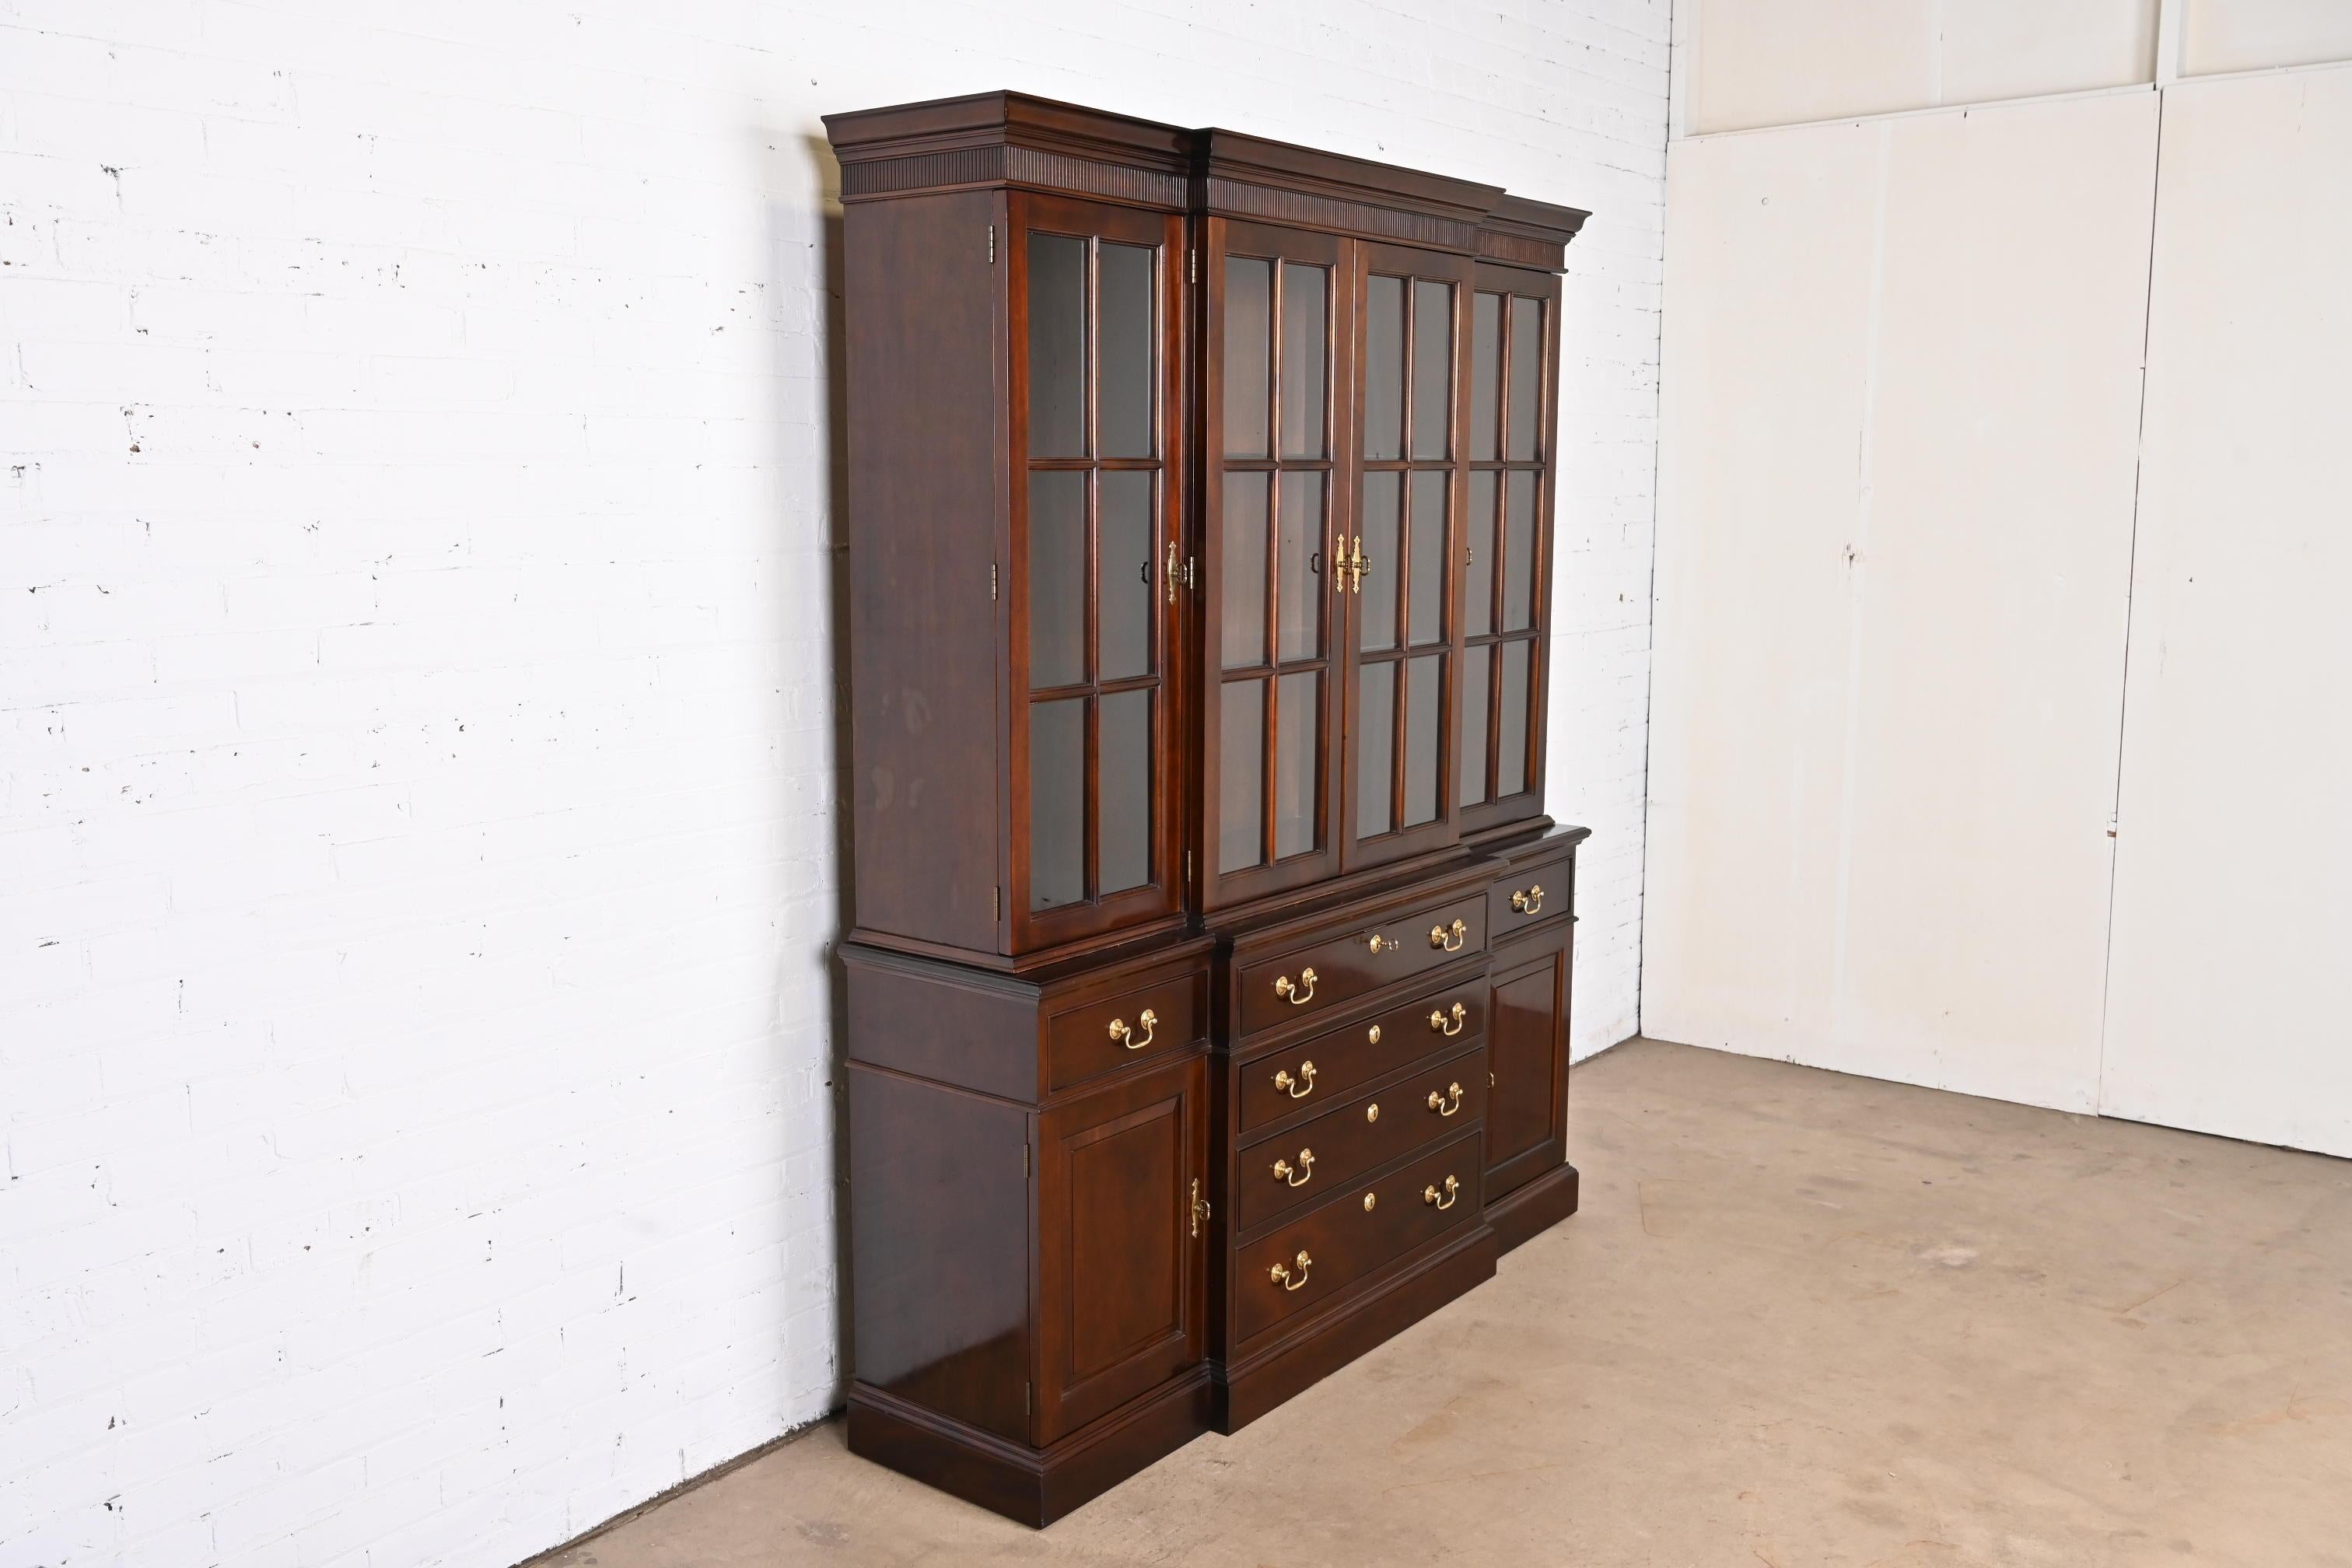 20th Century Stickley Georgian Cherry Wood Lighted Breakfront Bookcase Cabinet